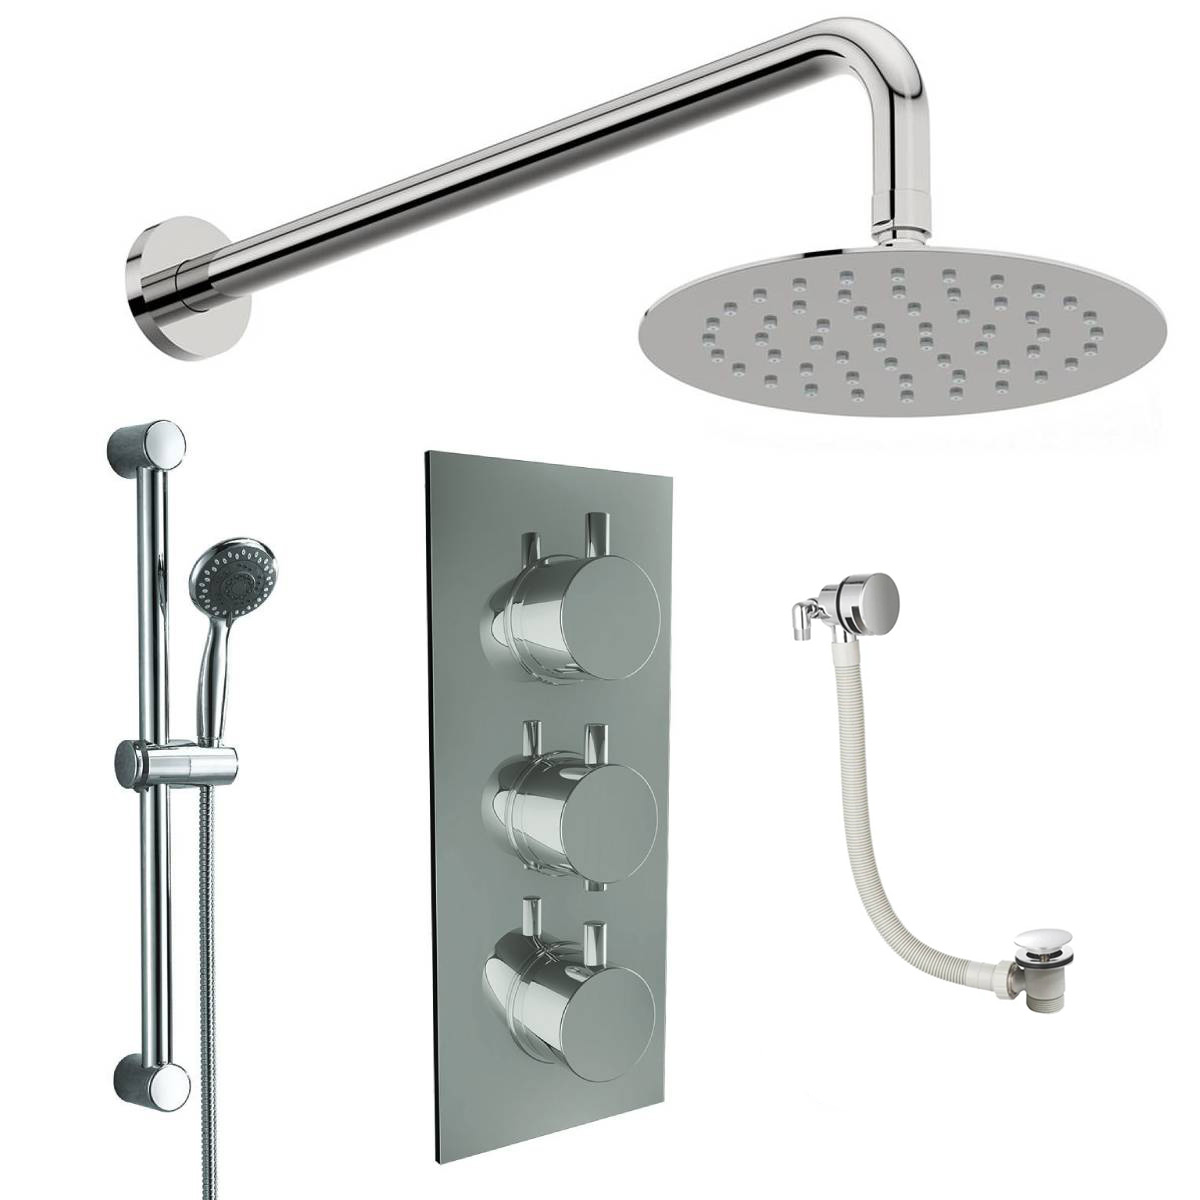 Round Triple Thermostatic Concealed Mixer Shower Kit with Wall Mounted 200mm Shower Head, Slide Rail Kit & Overflow Filler (12472)